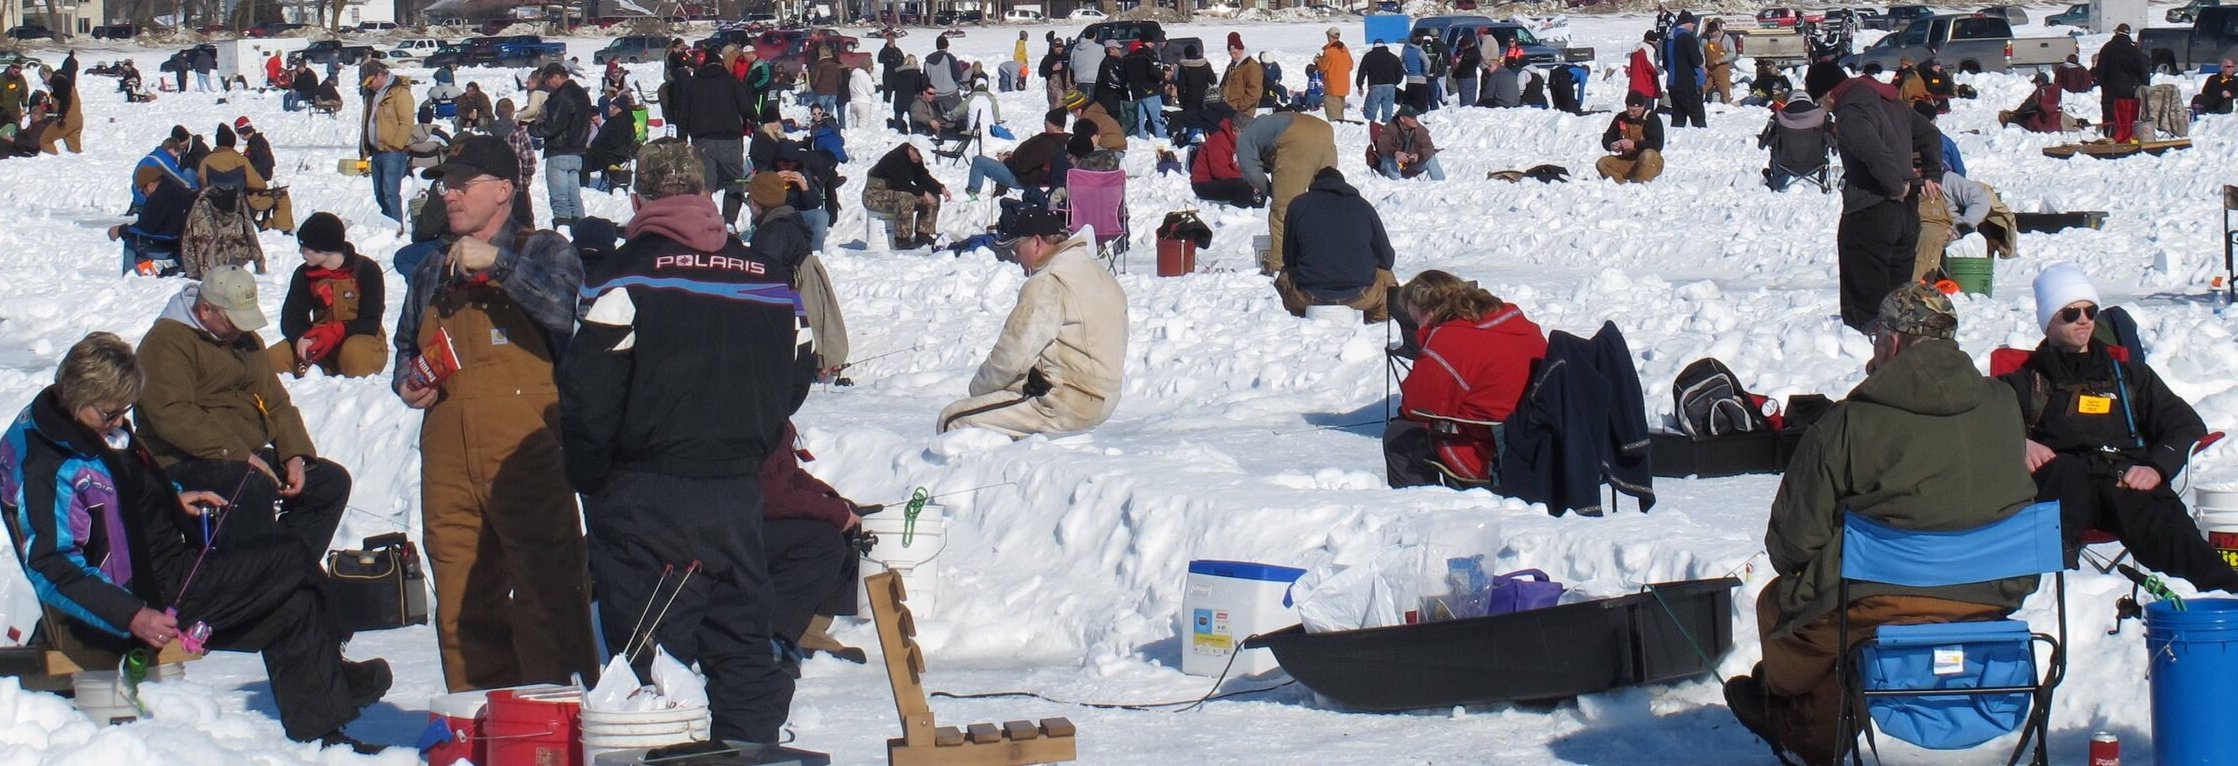 Detroit Lakes Poles and Holes Ice Fishing Derby